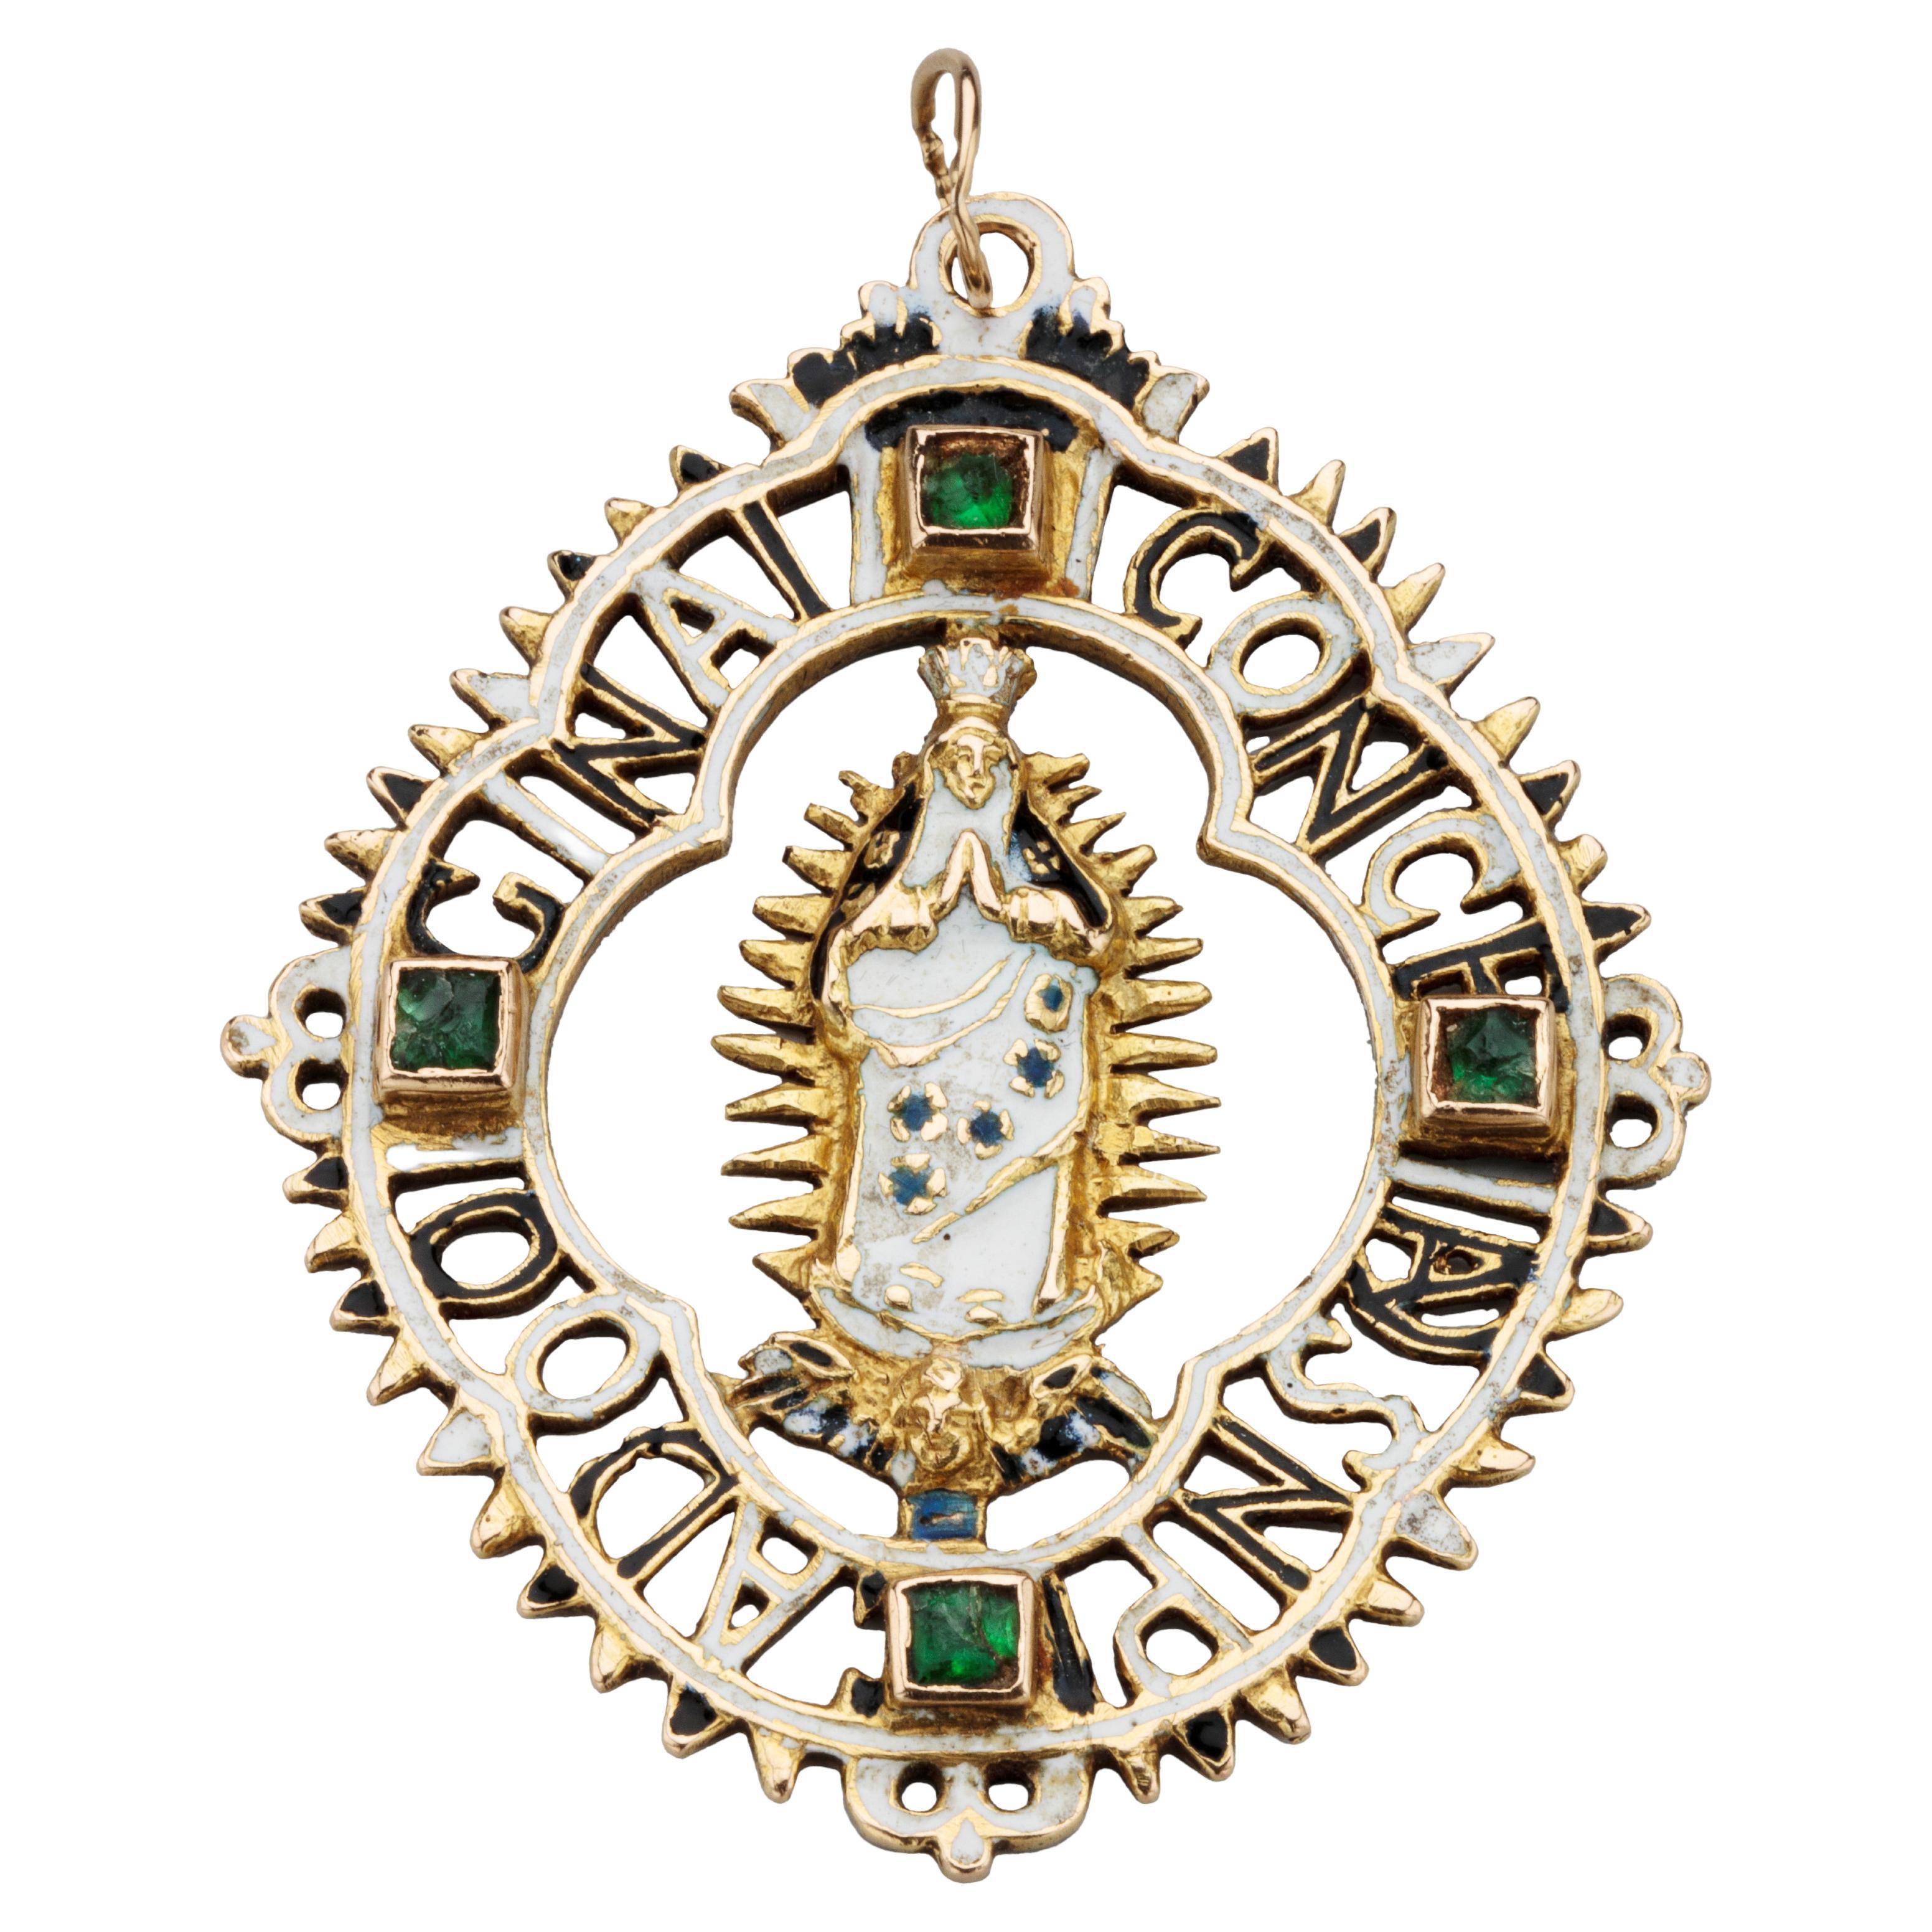 Antique Gold Spanish Pendant with the Virgin of the Immaculate Conception